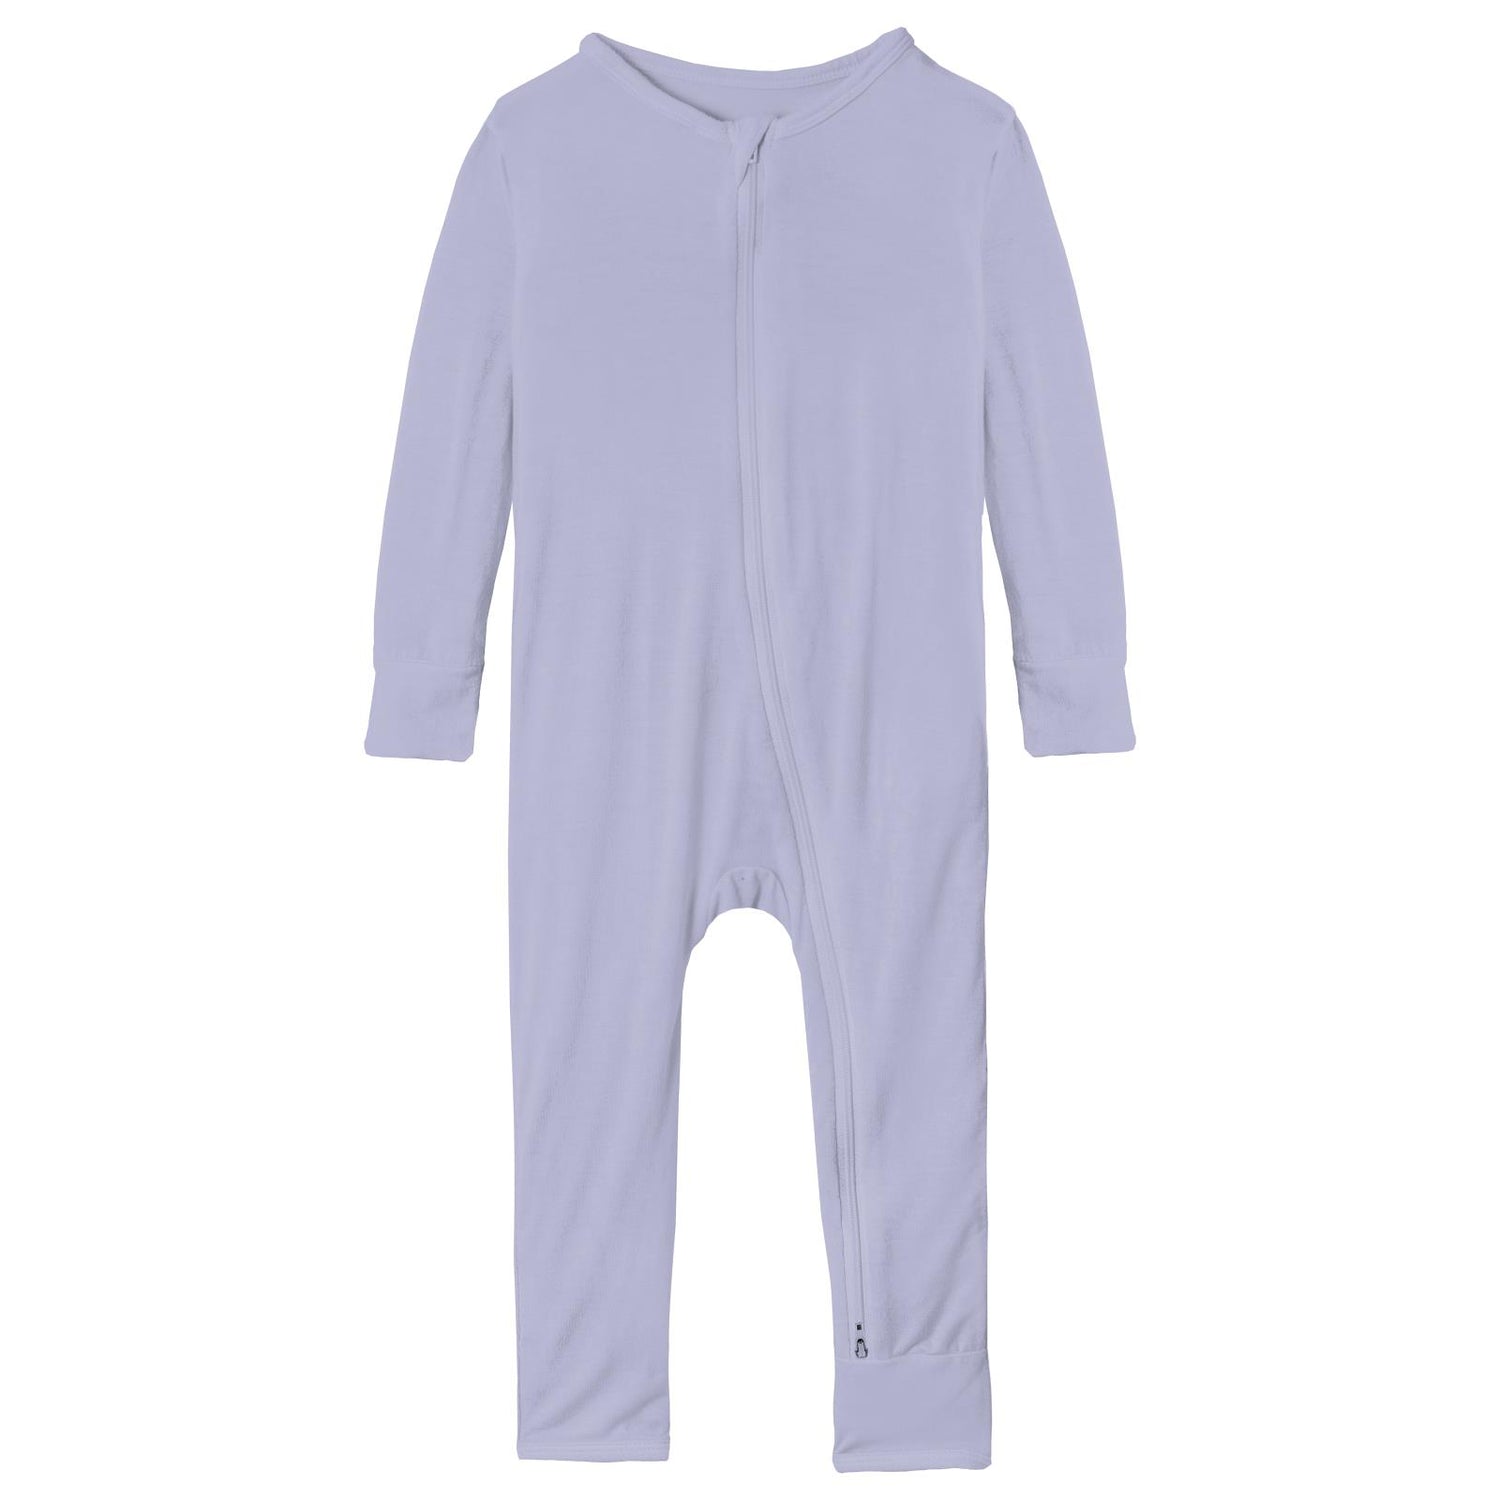 Coverall with 2 Way Zipper in Lilac